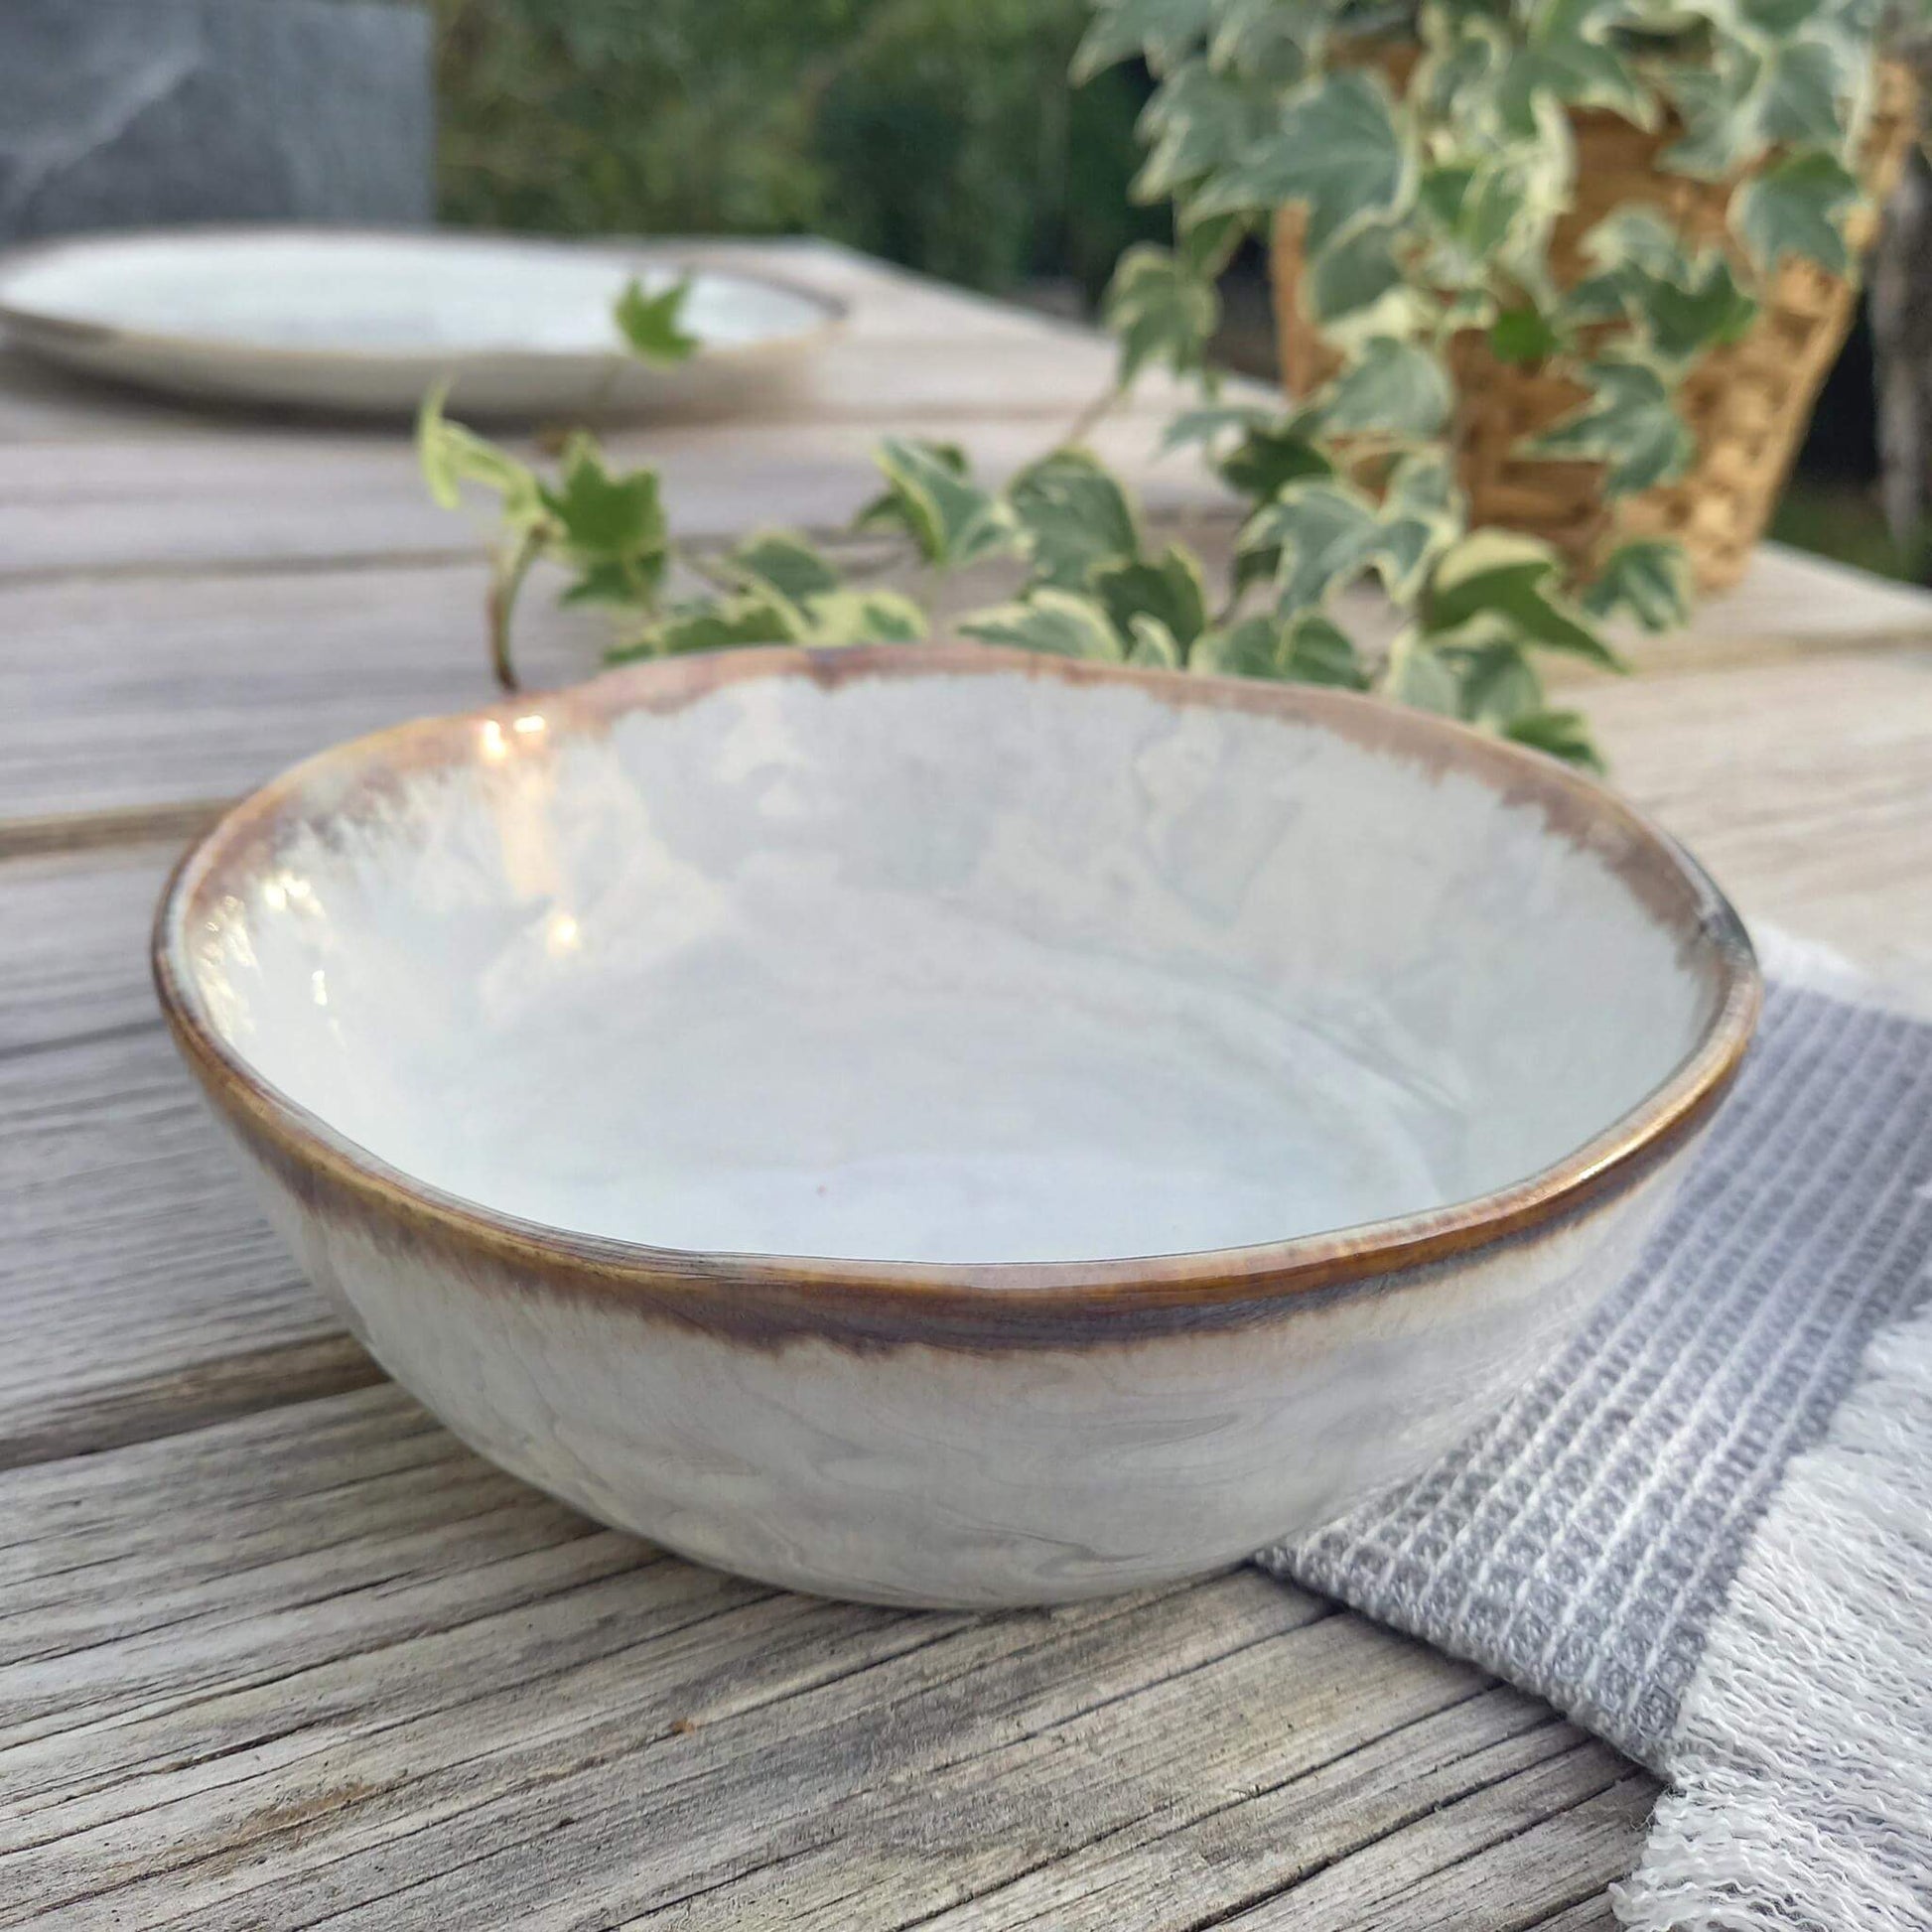 Biarritz - mother-of-pearl white bowl 14 cm - Unik by Nature